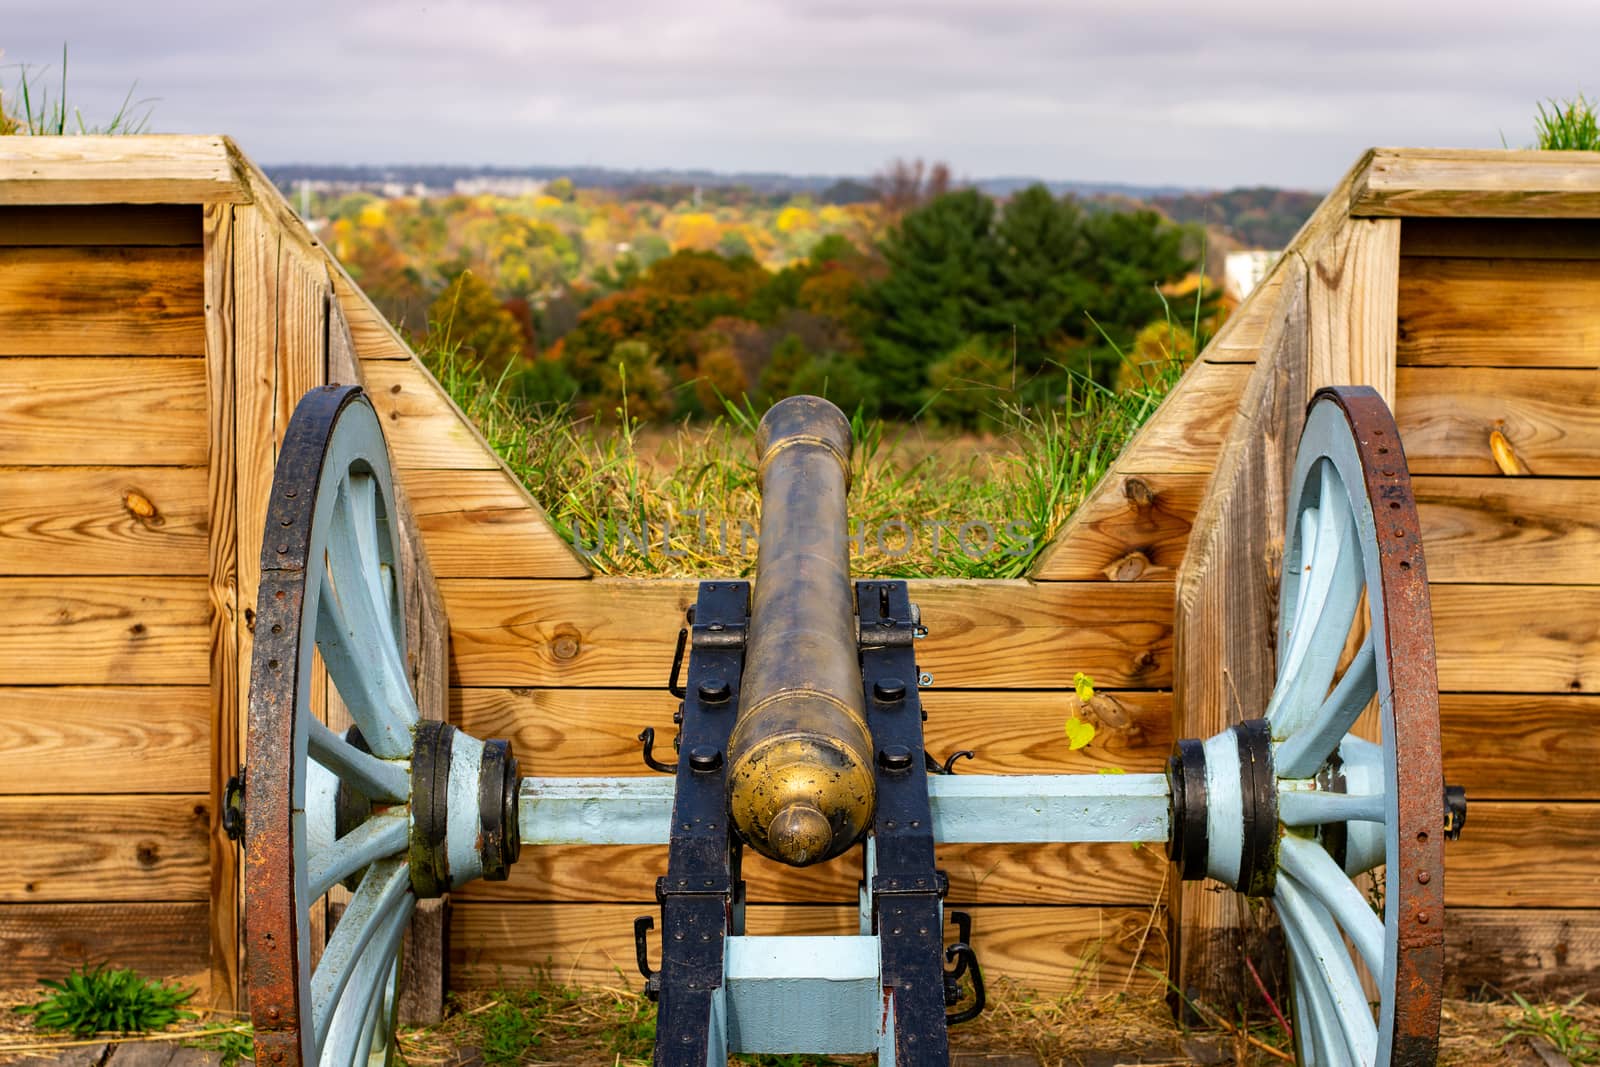 A Revoluationay War Era Cannon Looking Out From General Muhlenberg's Brigade Redoubt in Valley Forge National Historical Park